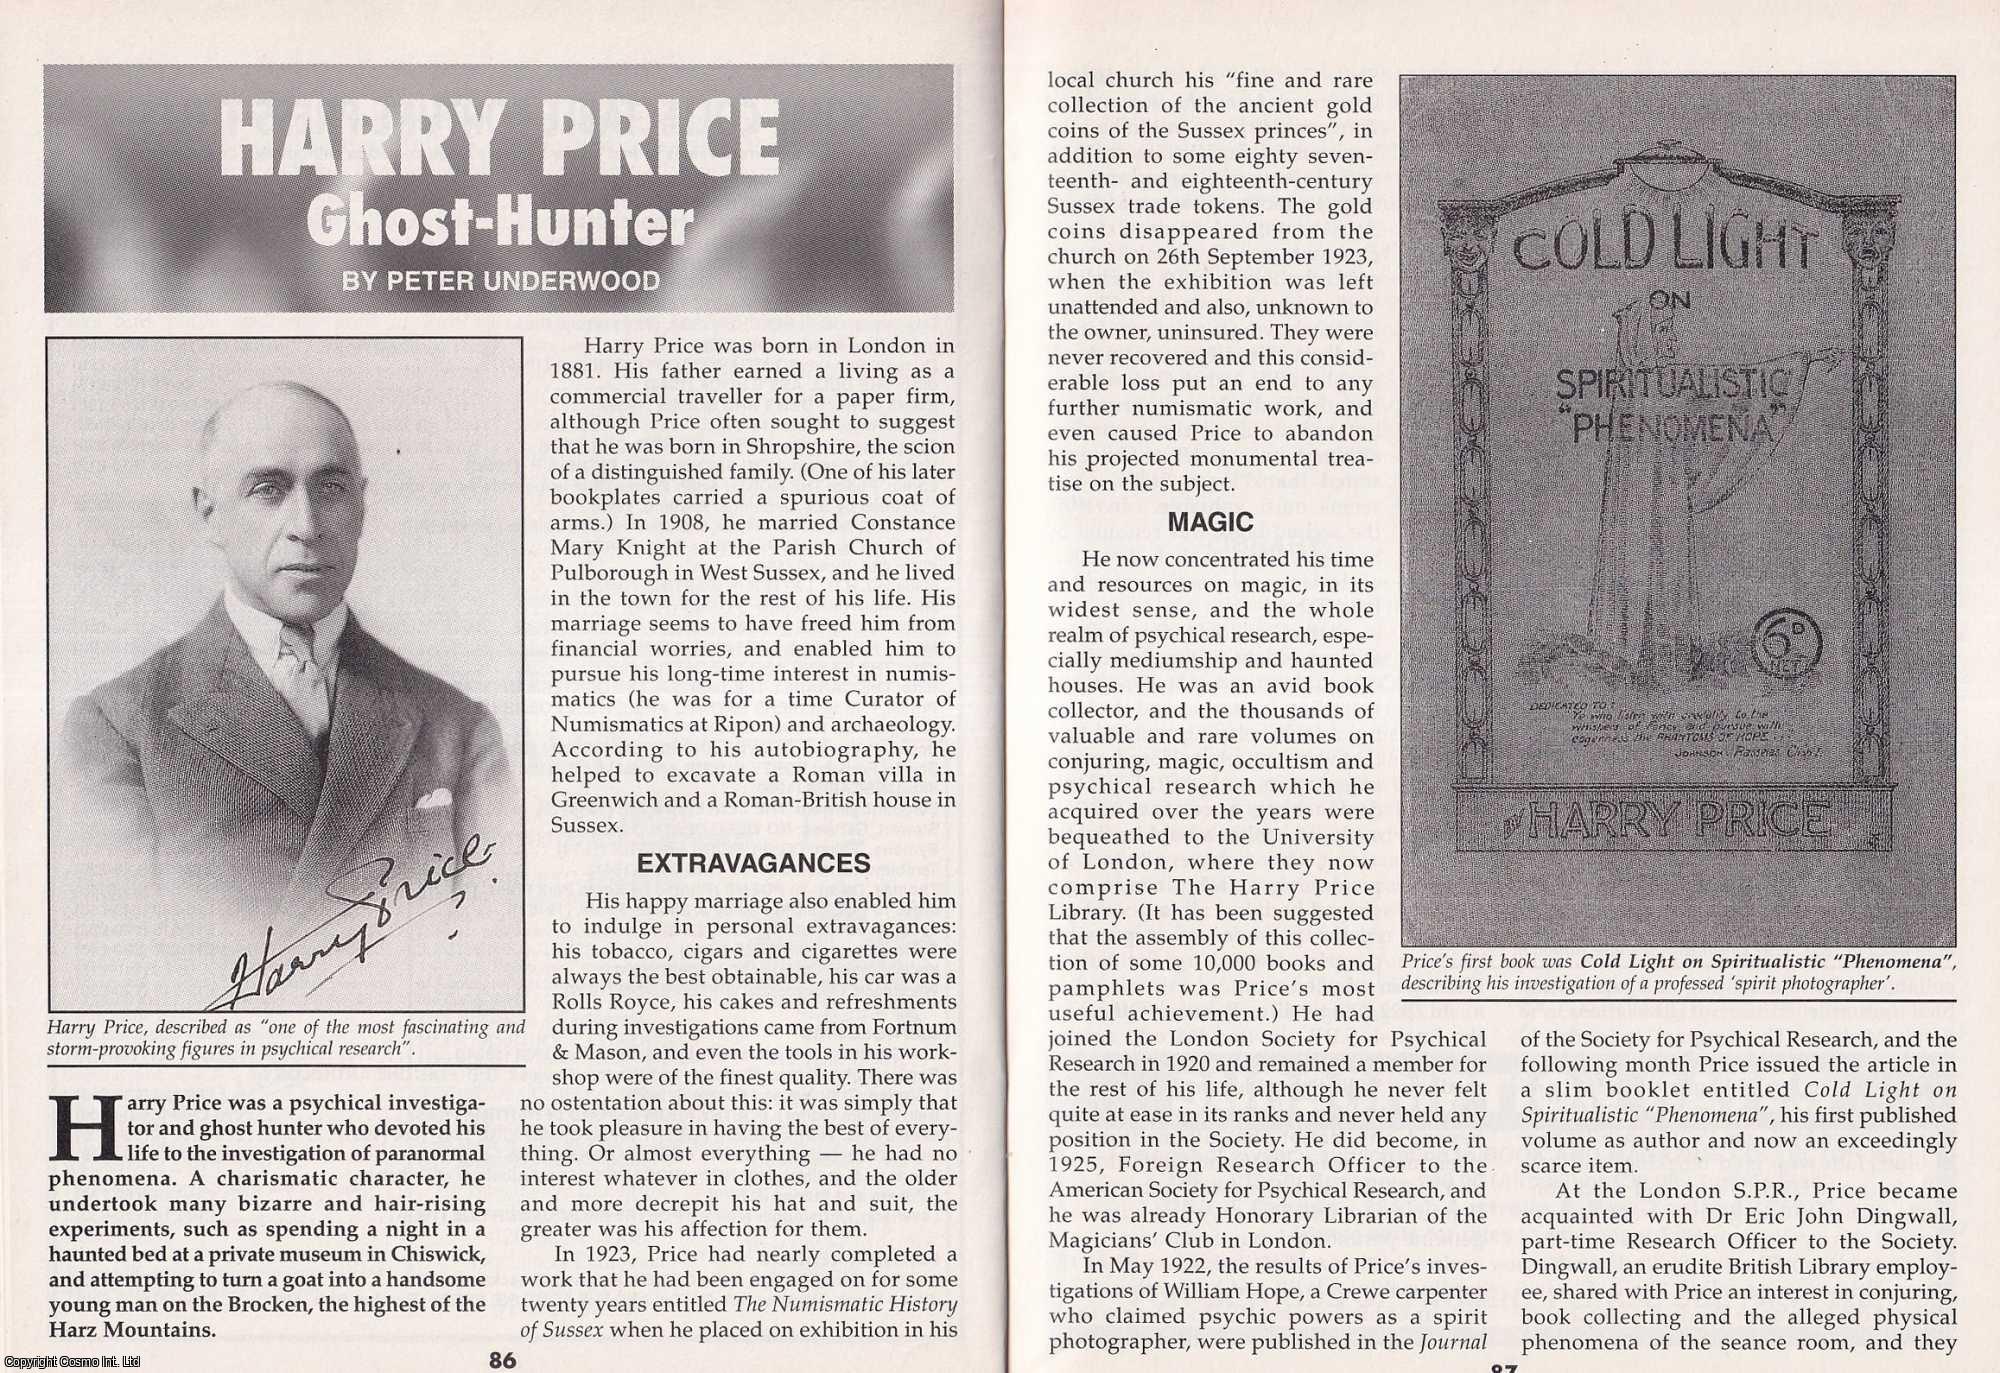 Peter Underwood - Harry Price. Ghost-Hunter. This is an original article separated from an issue of The Book & Magazine Collector publication.